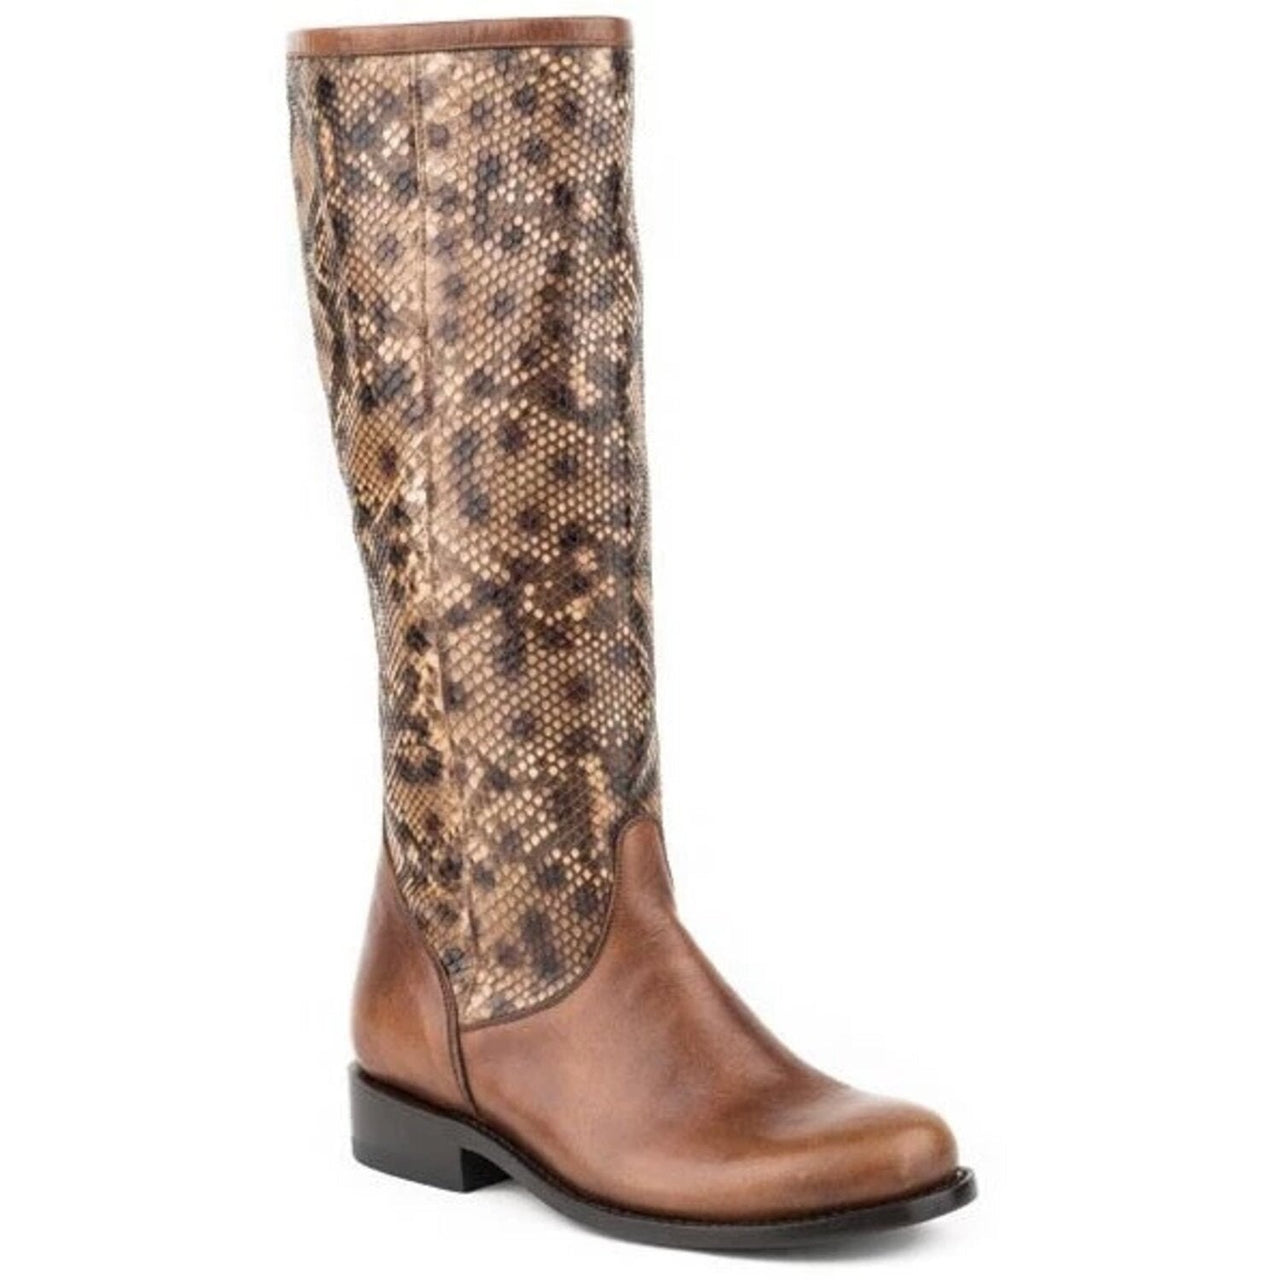 Women's Stetson Salma Knee High Python Boots Round Toe Handcrafted Brown - yeehawcowboy